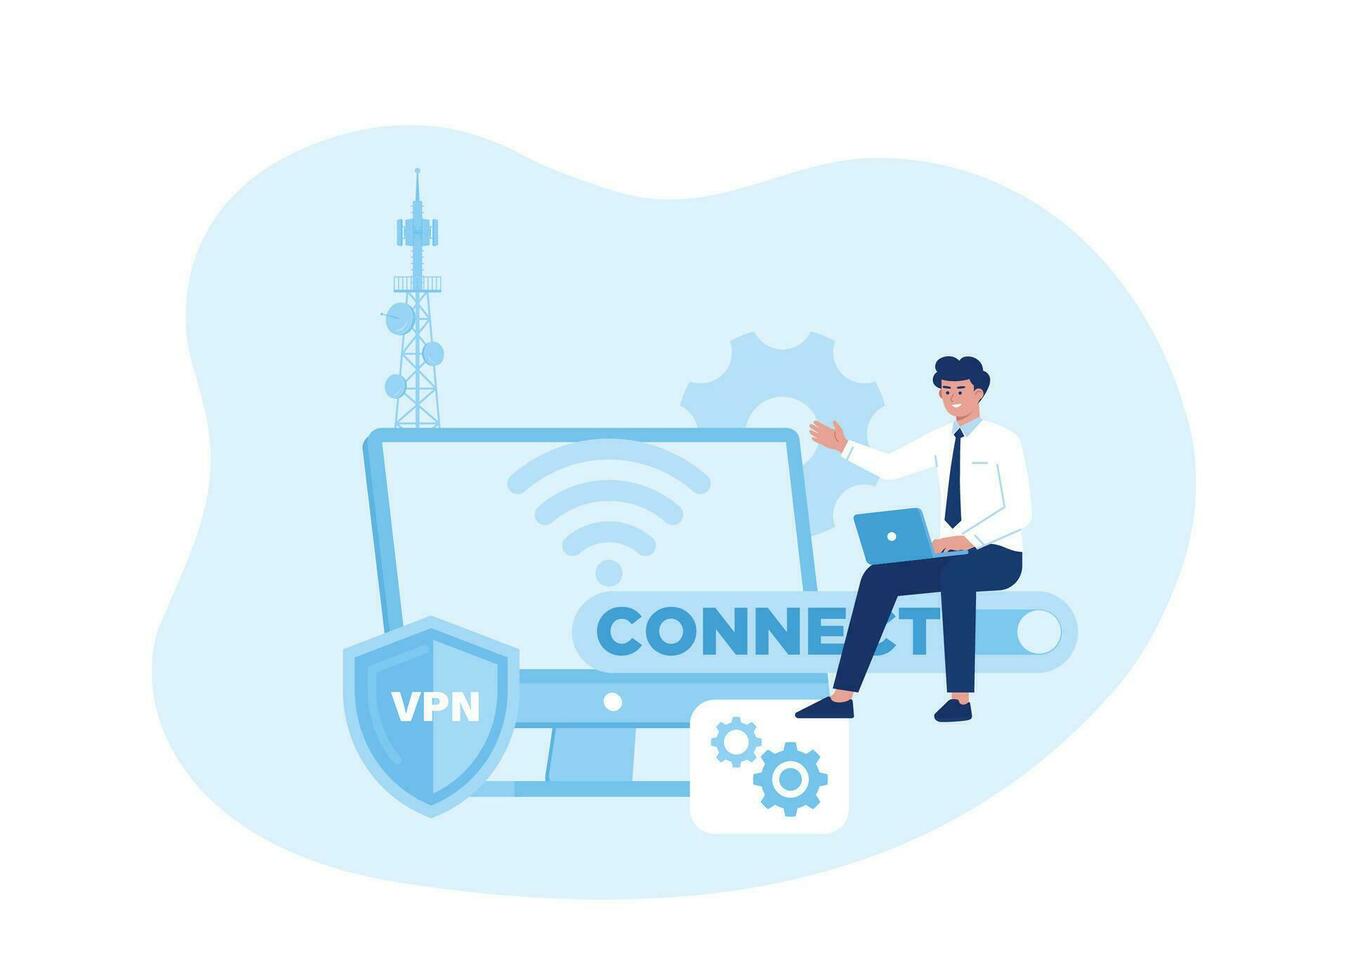 People using vpn technology system to protect concept concept flat illustration vector